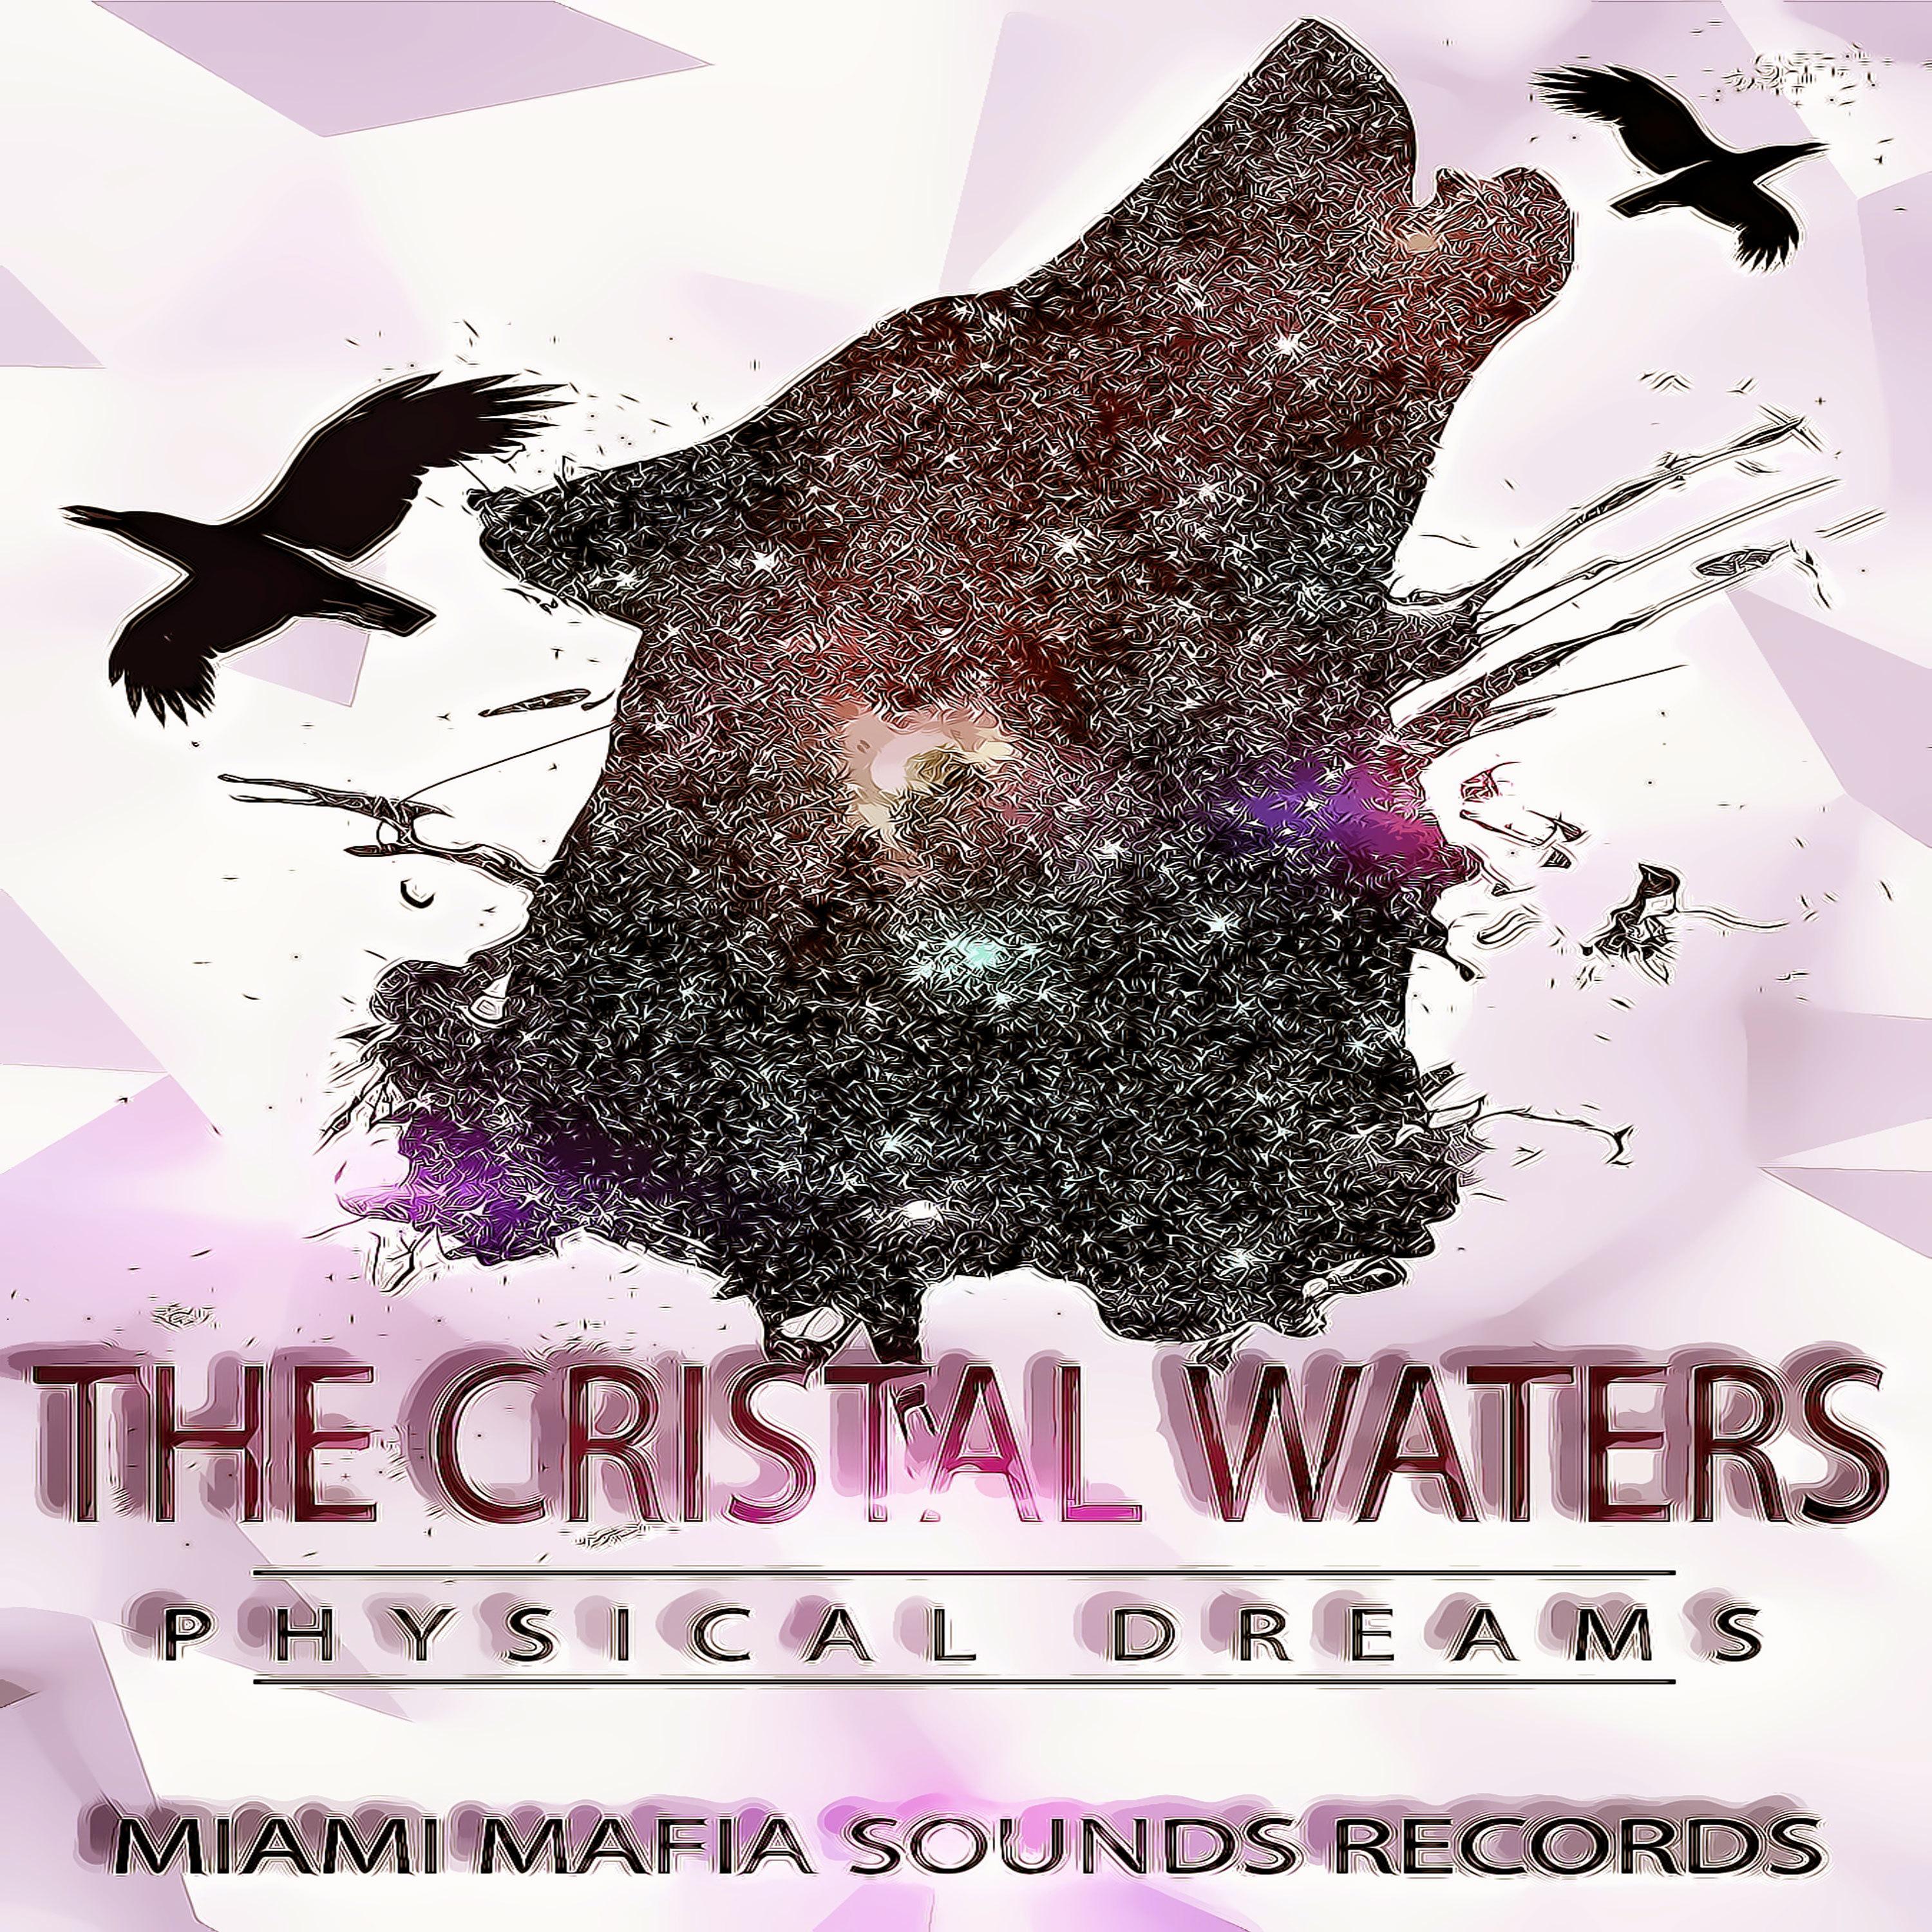 The Cristal Waters